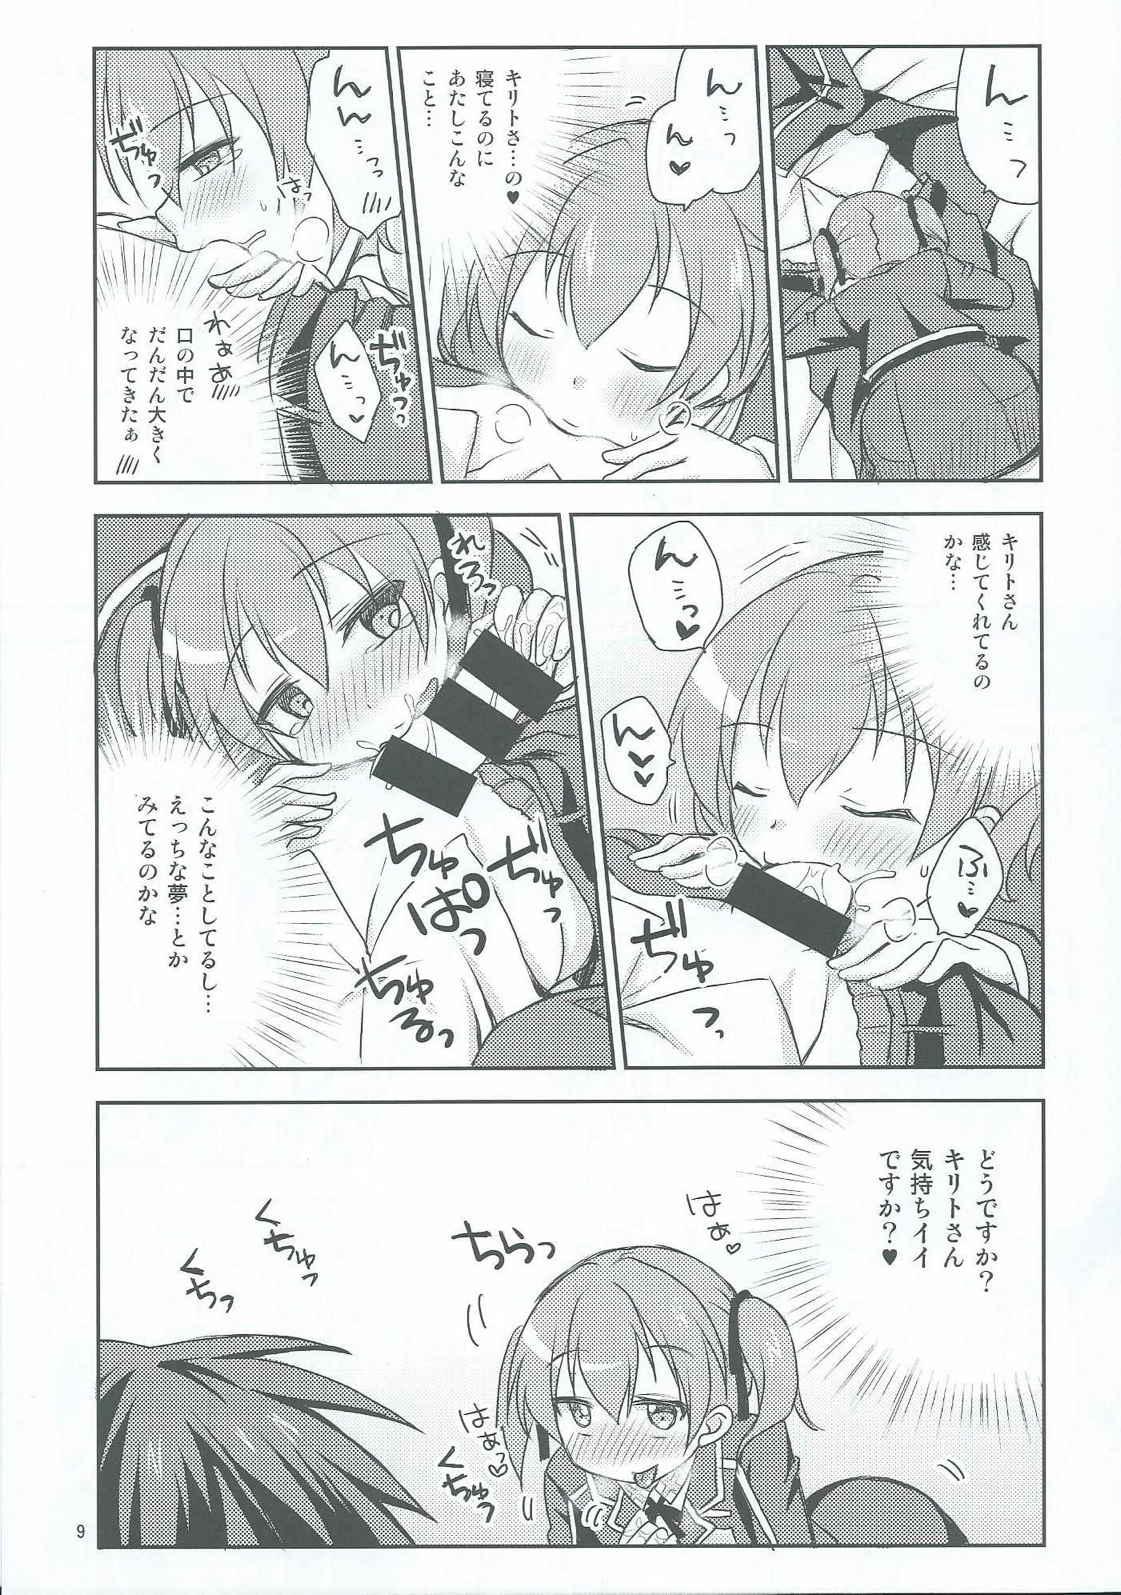 Thailand Itazura Silica-chan - Sword art online French - Page 7